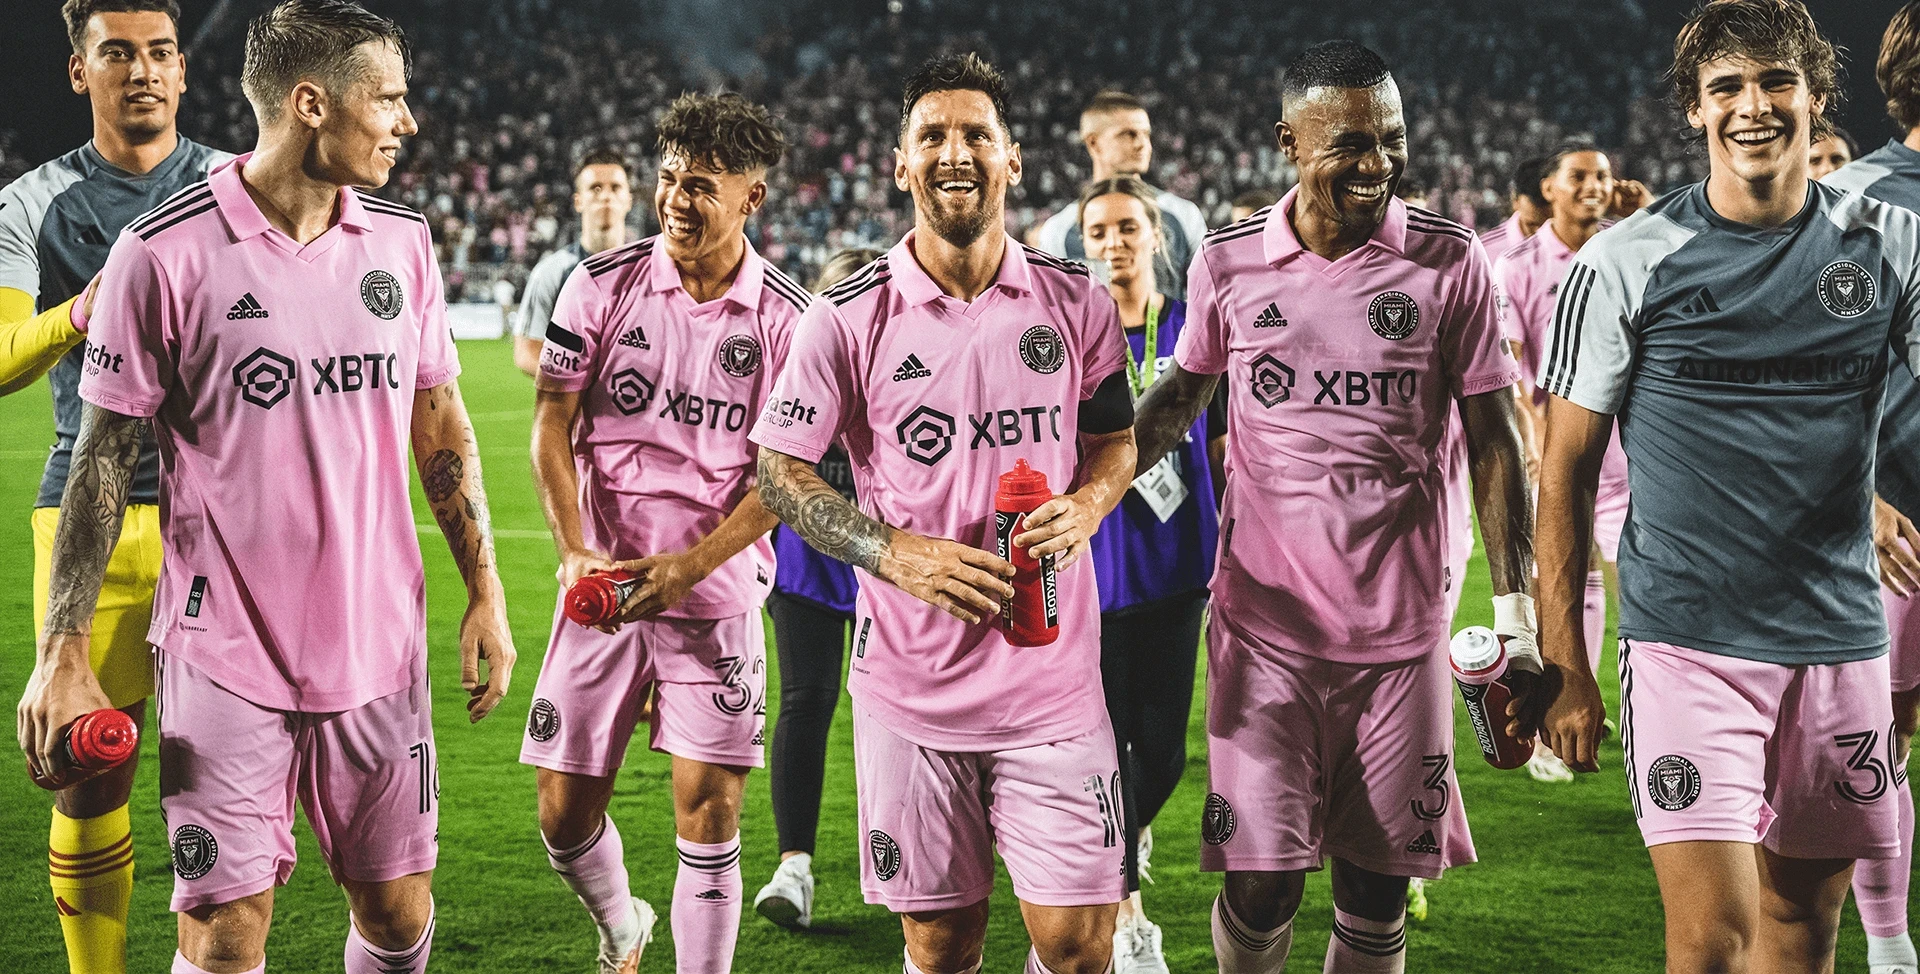 Inter Miami CF players on the pitch, including Lionel Messi front and center with the Fracht logo showing on the right arm of his kit.